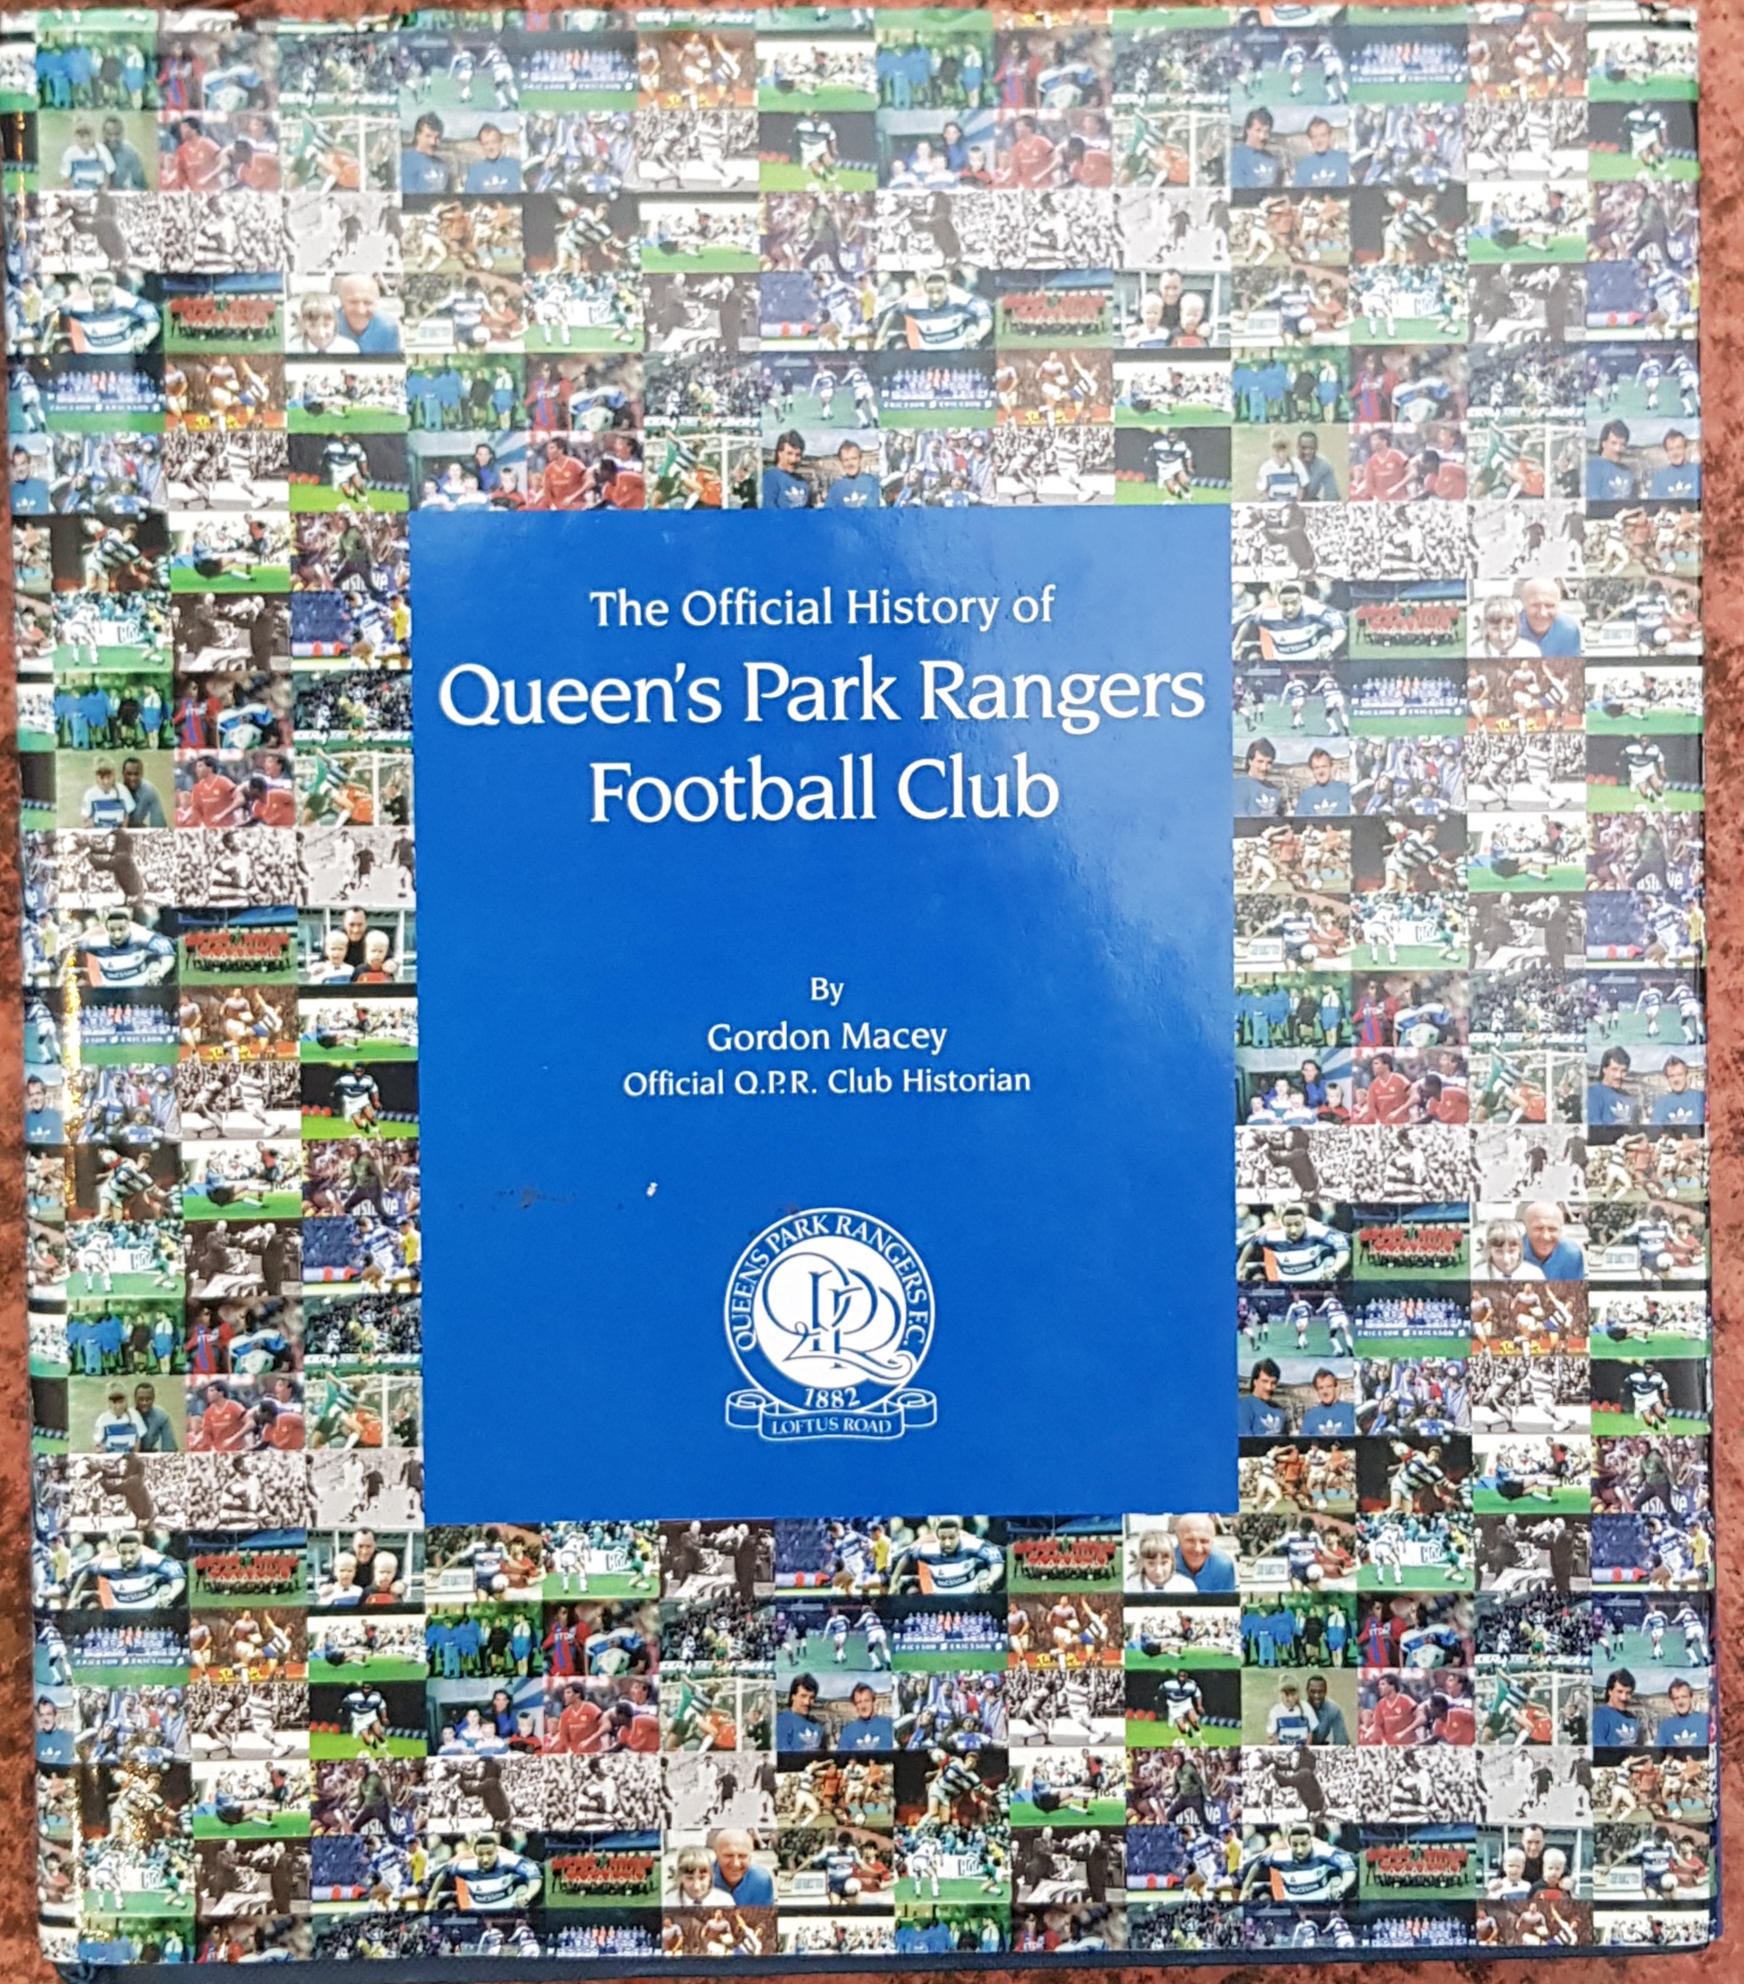 Gordon's 'A Complete Record of Queen's Park Rangers' published in 1993 and the updated millennium edition 'The Official History of Queen's Park Rangers' both very well received by R's fans and an invaluable source to many. 